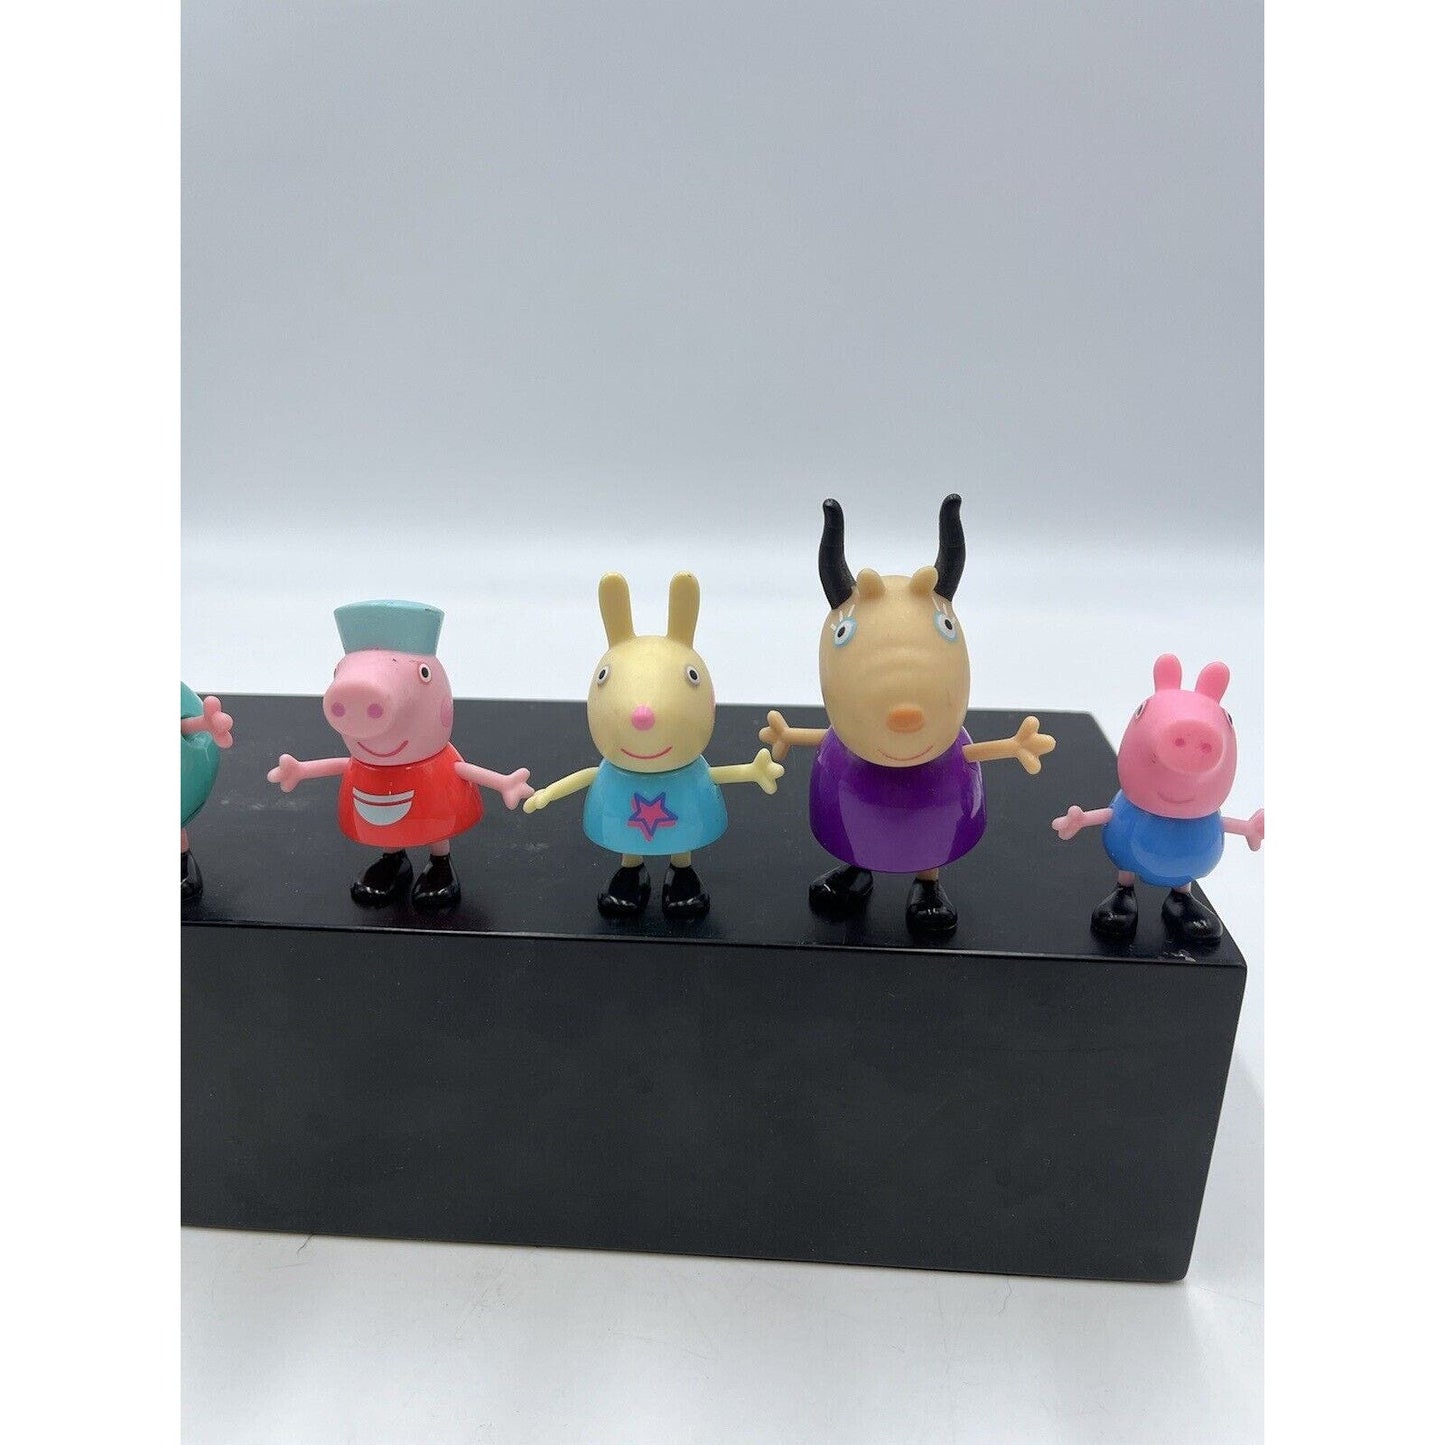 Peppa Pig Toy Figure Lot - Mixed Action Figure Free Shipping!